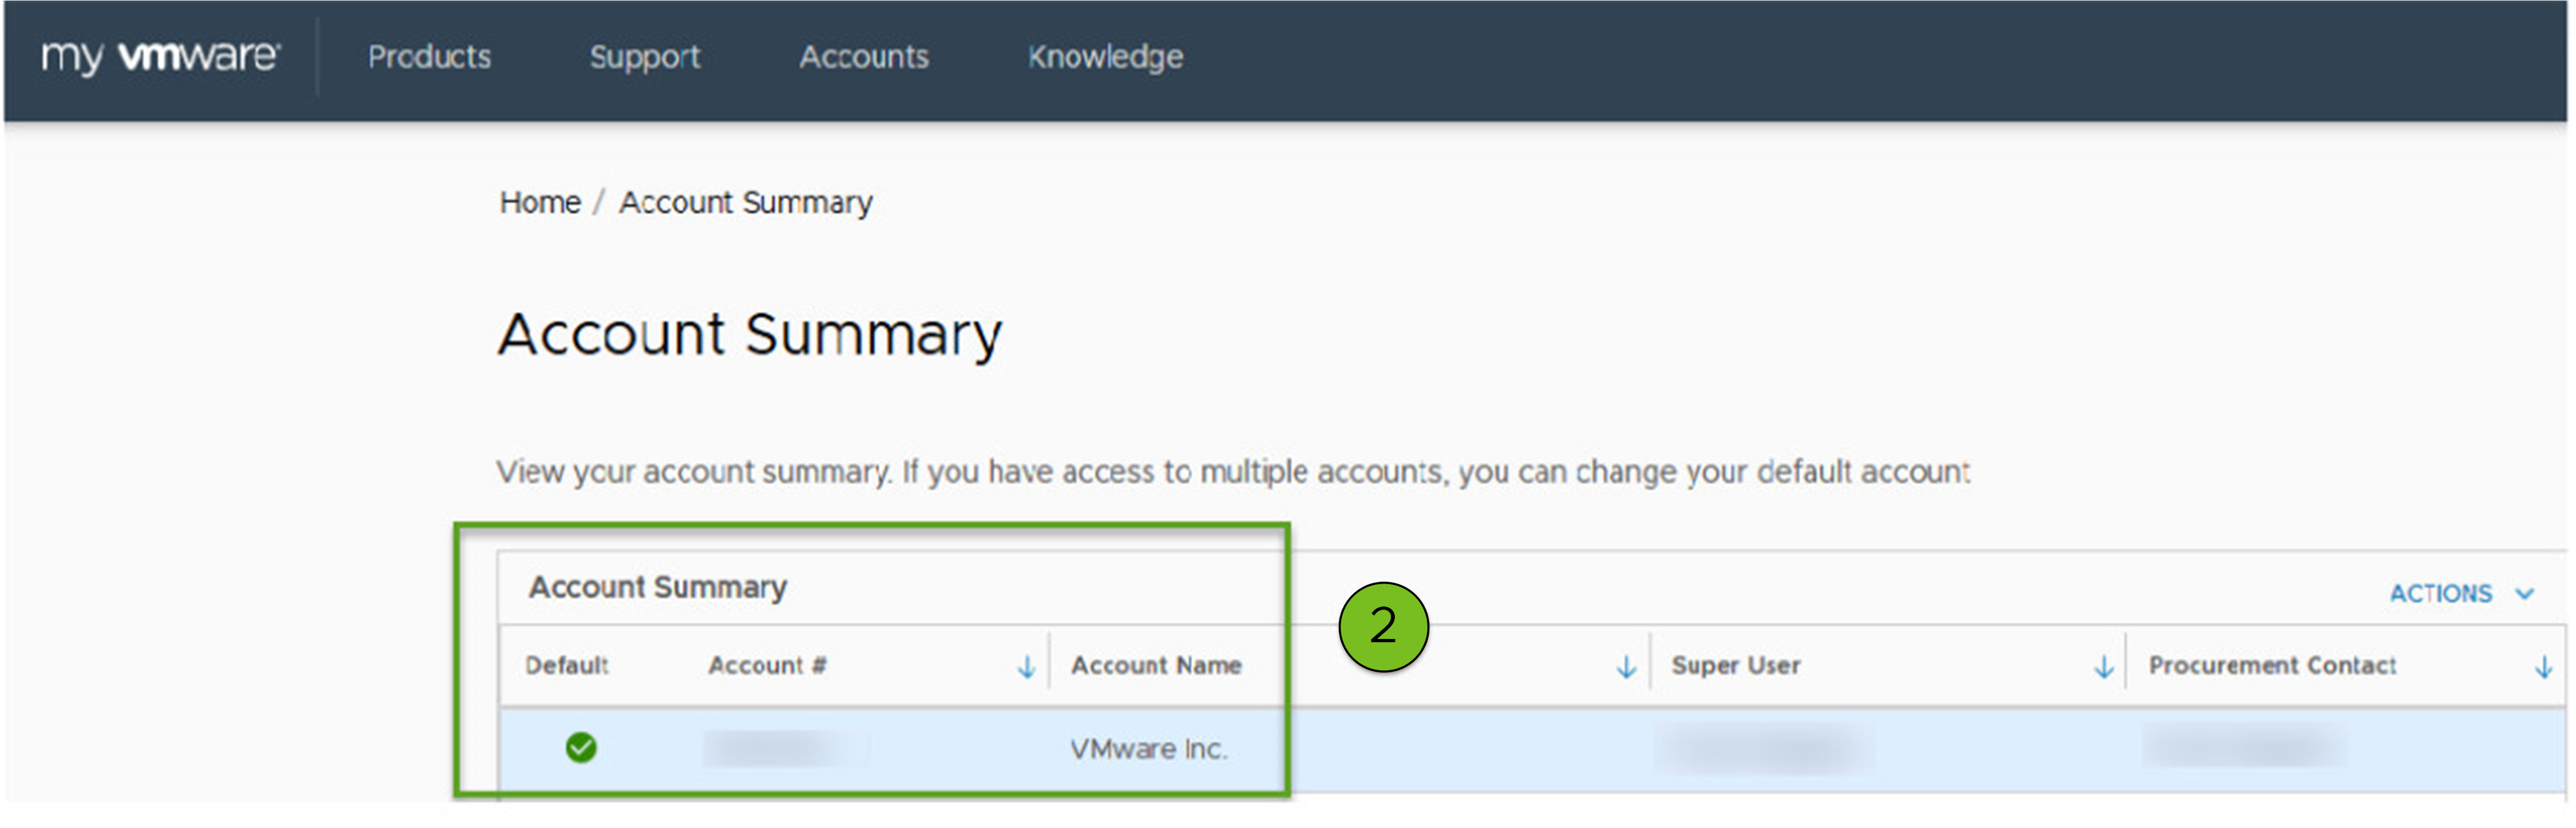 Website: Manage Accounts quick link button on customerconnect.vmware.com